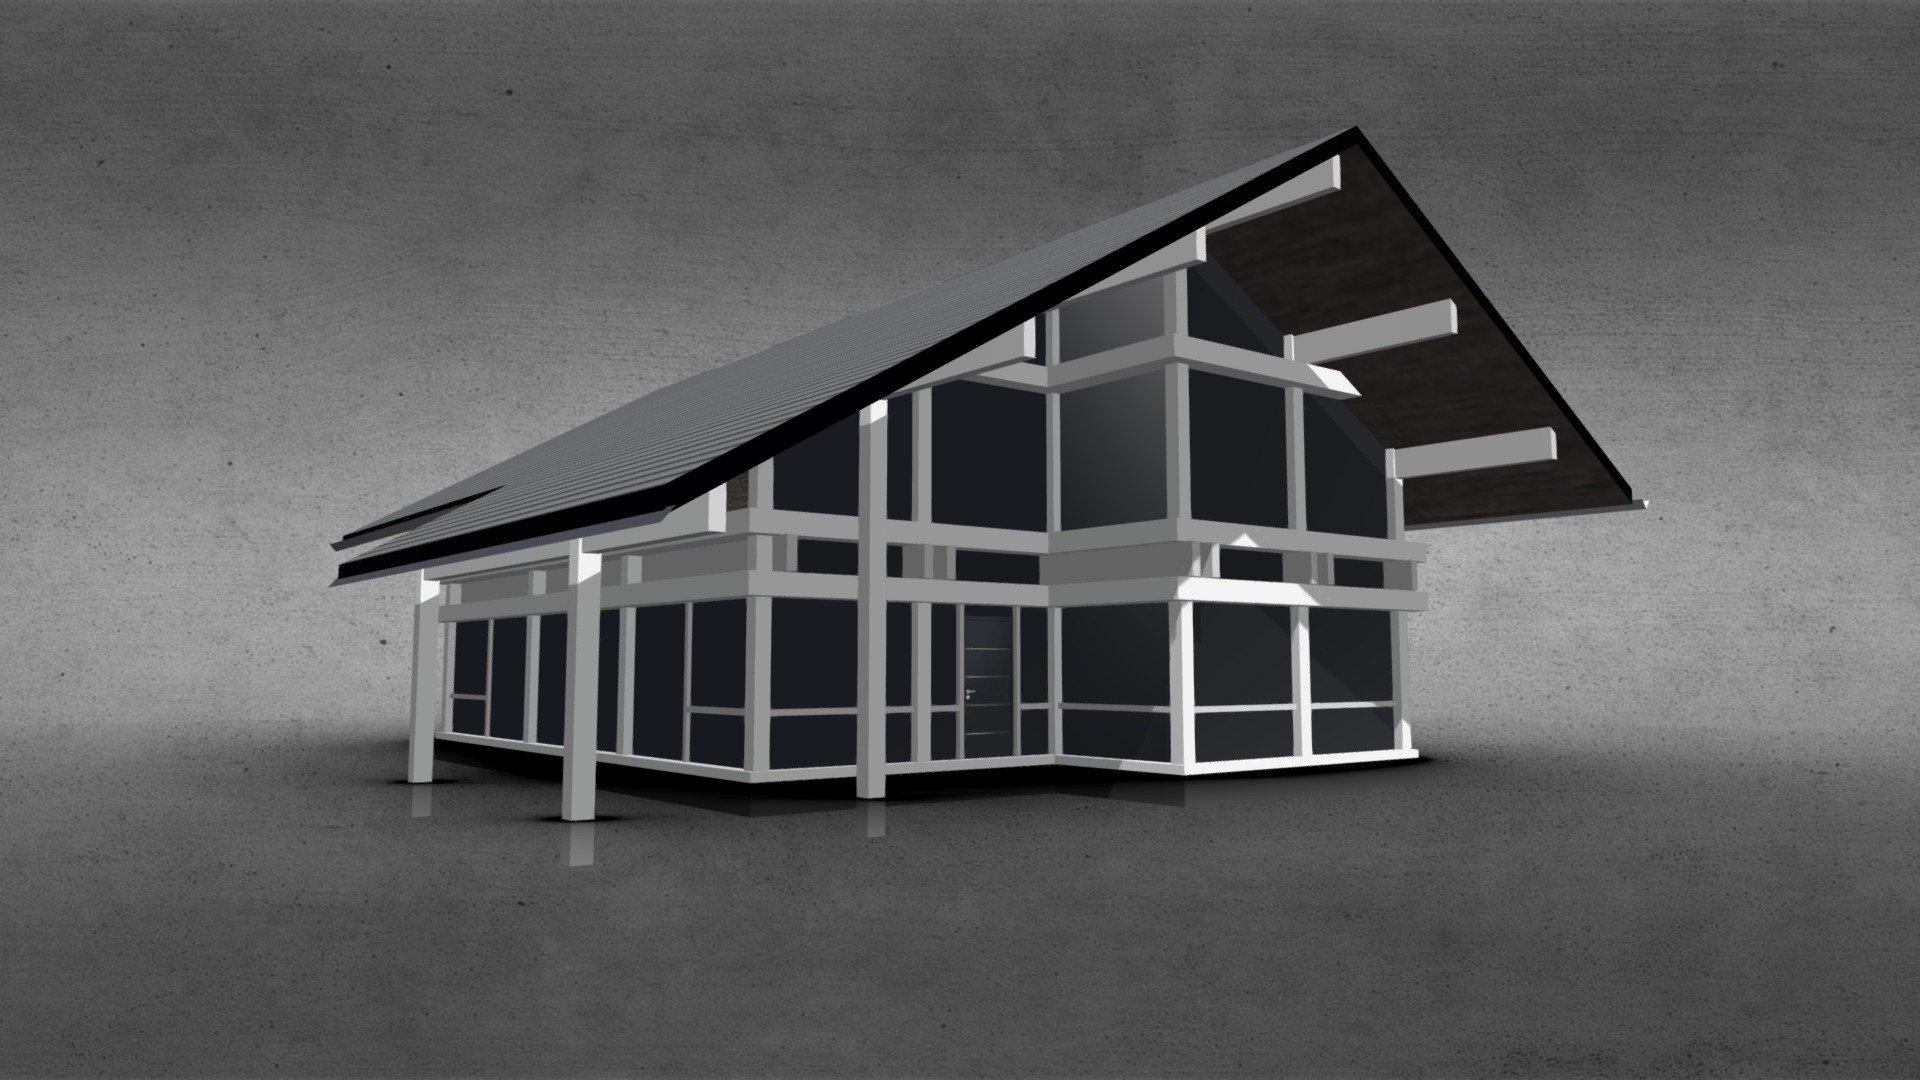 Wood Structure House 003

Designed, created and especialy adapted for the game &ldquo;Cities Skylines